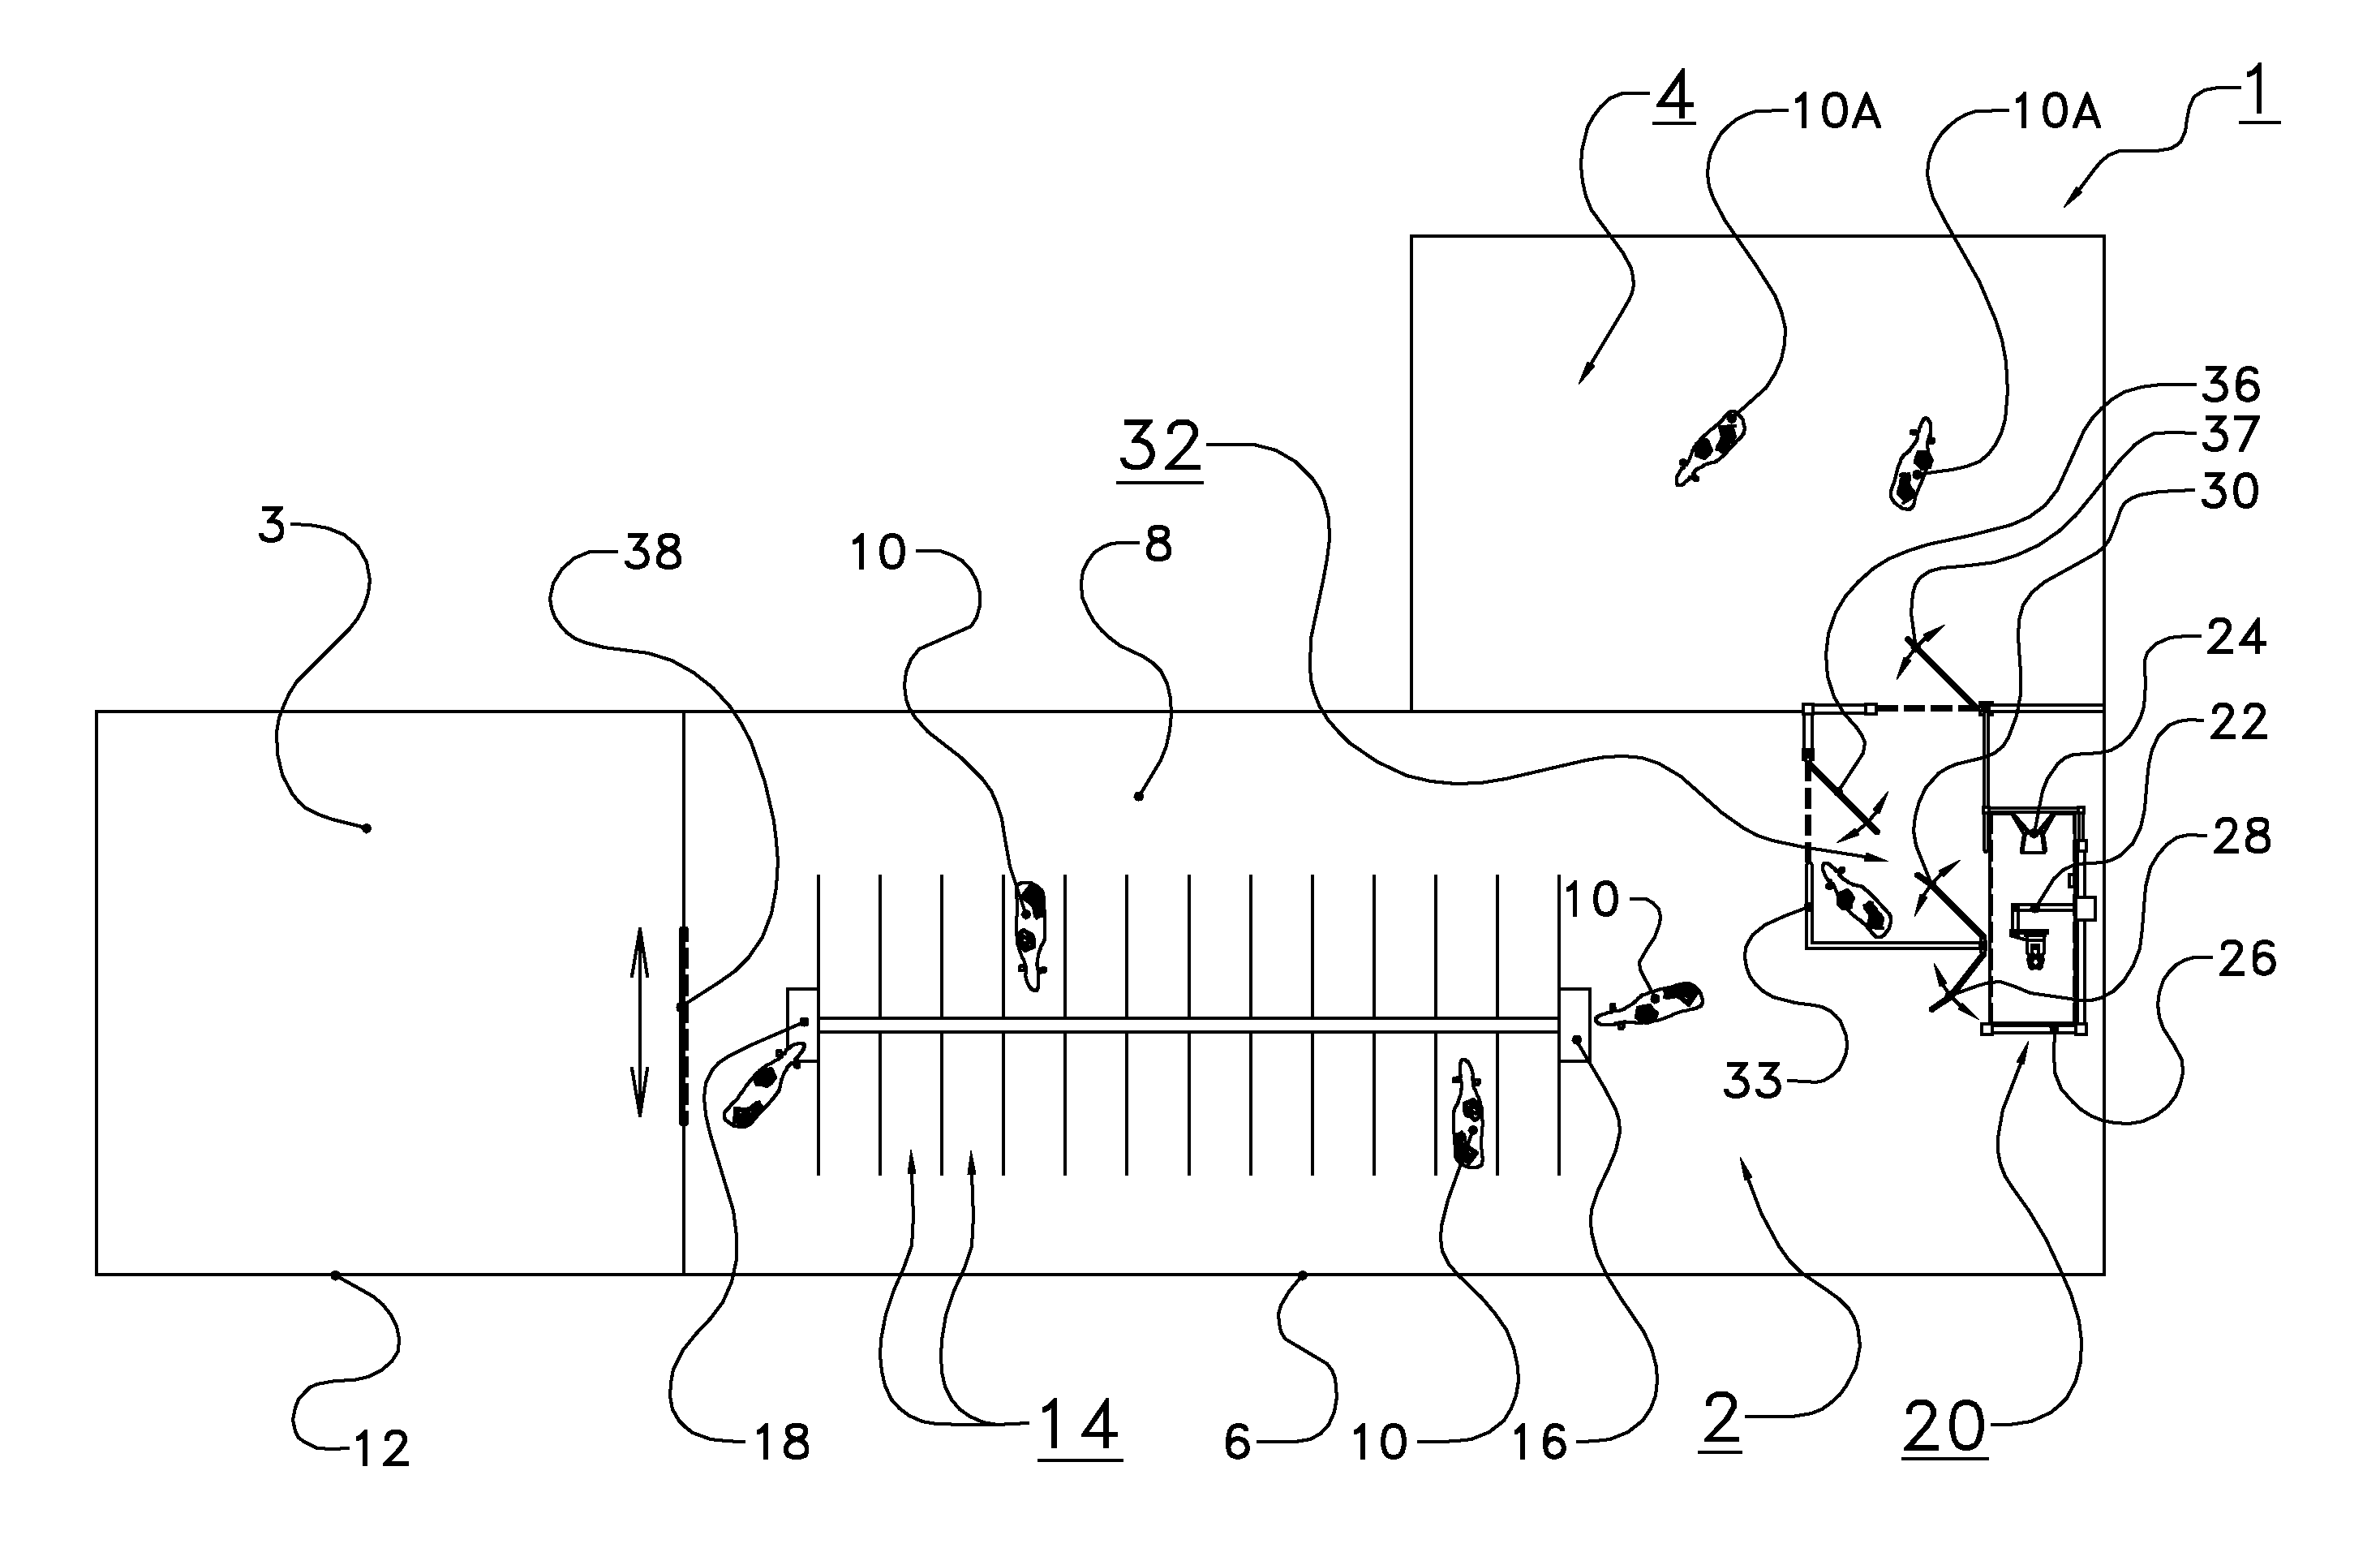 Method and system for managing a group of dairy animals